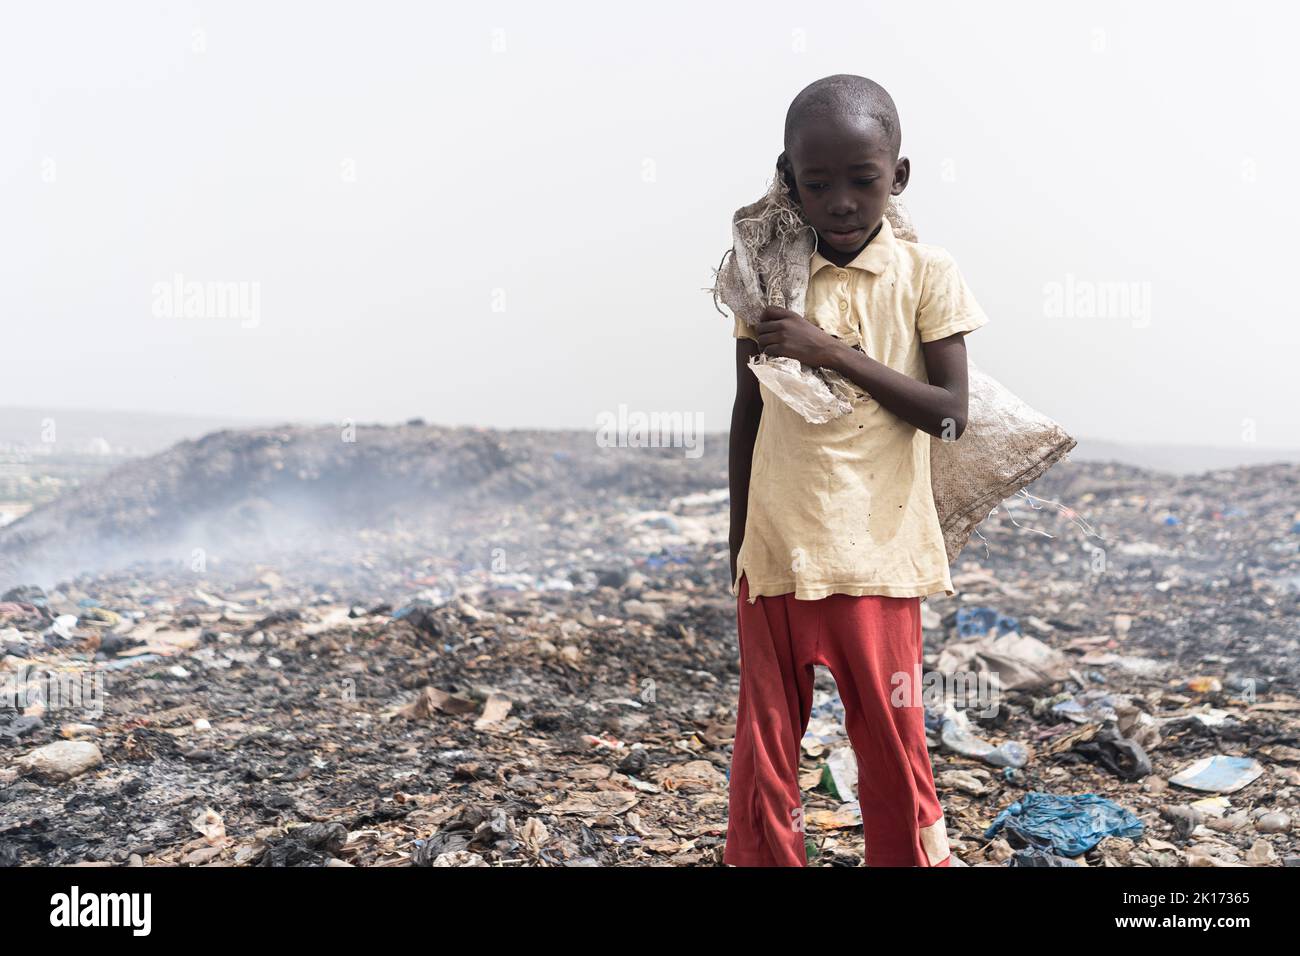 Neglected, malnourished African boy standing desolate in the midst of a smelly and smoking garbage dump; social issue of child abandon Stock Photo